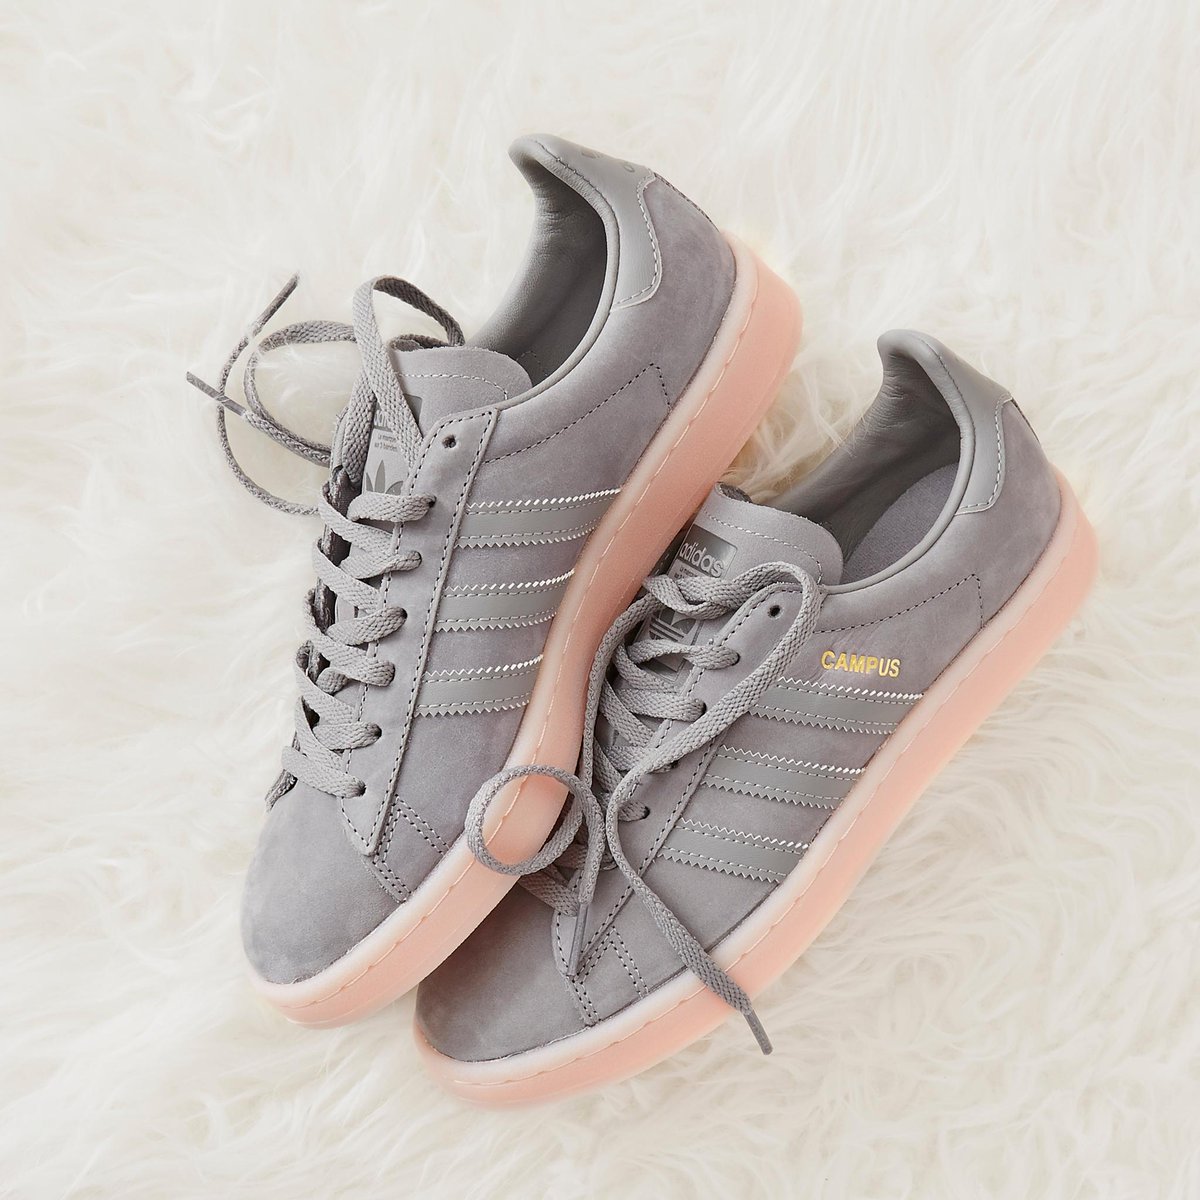 Shop the Adidas Campus Trainers 